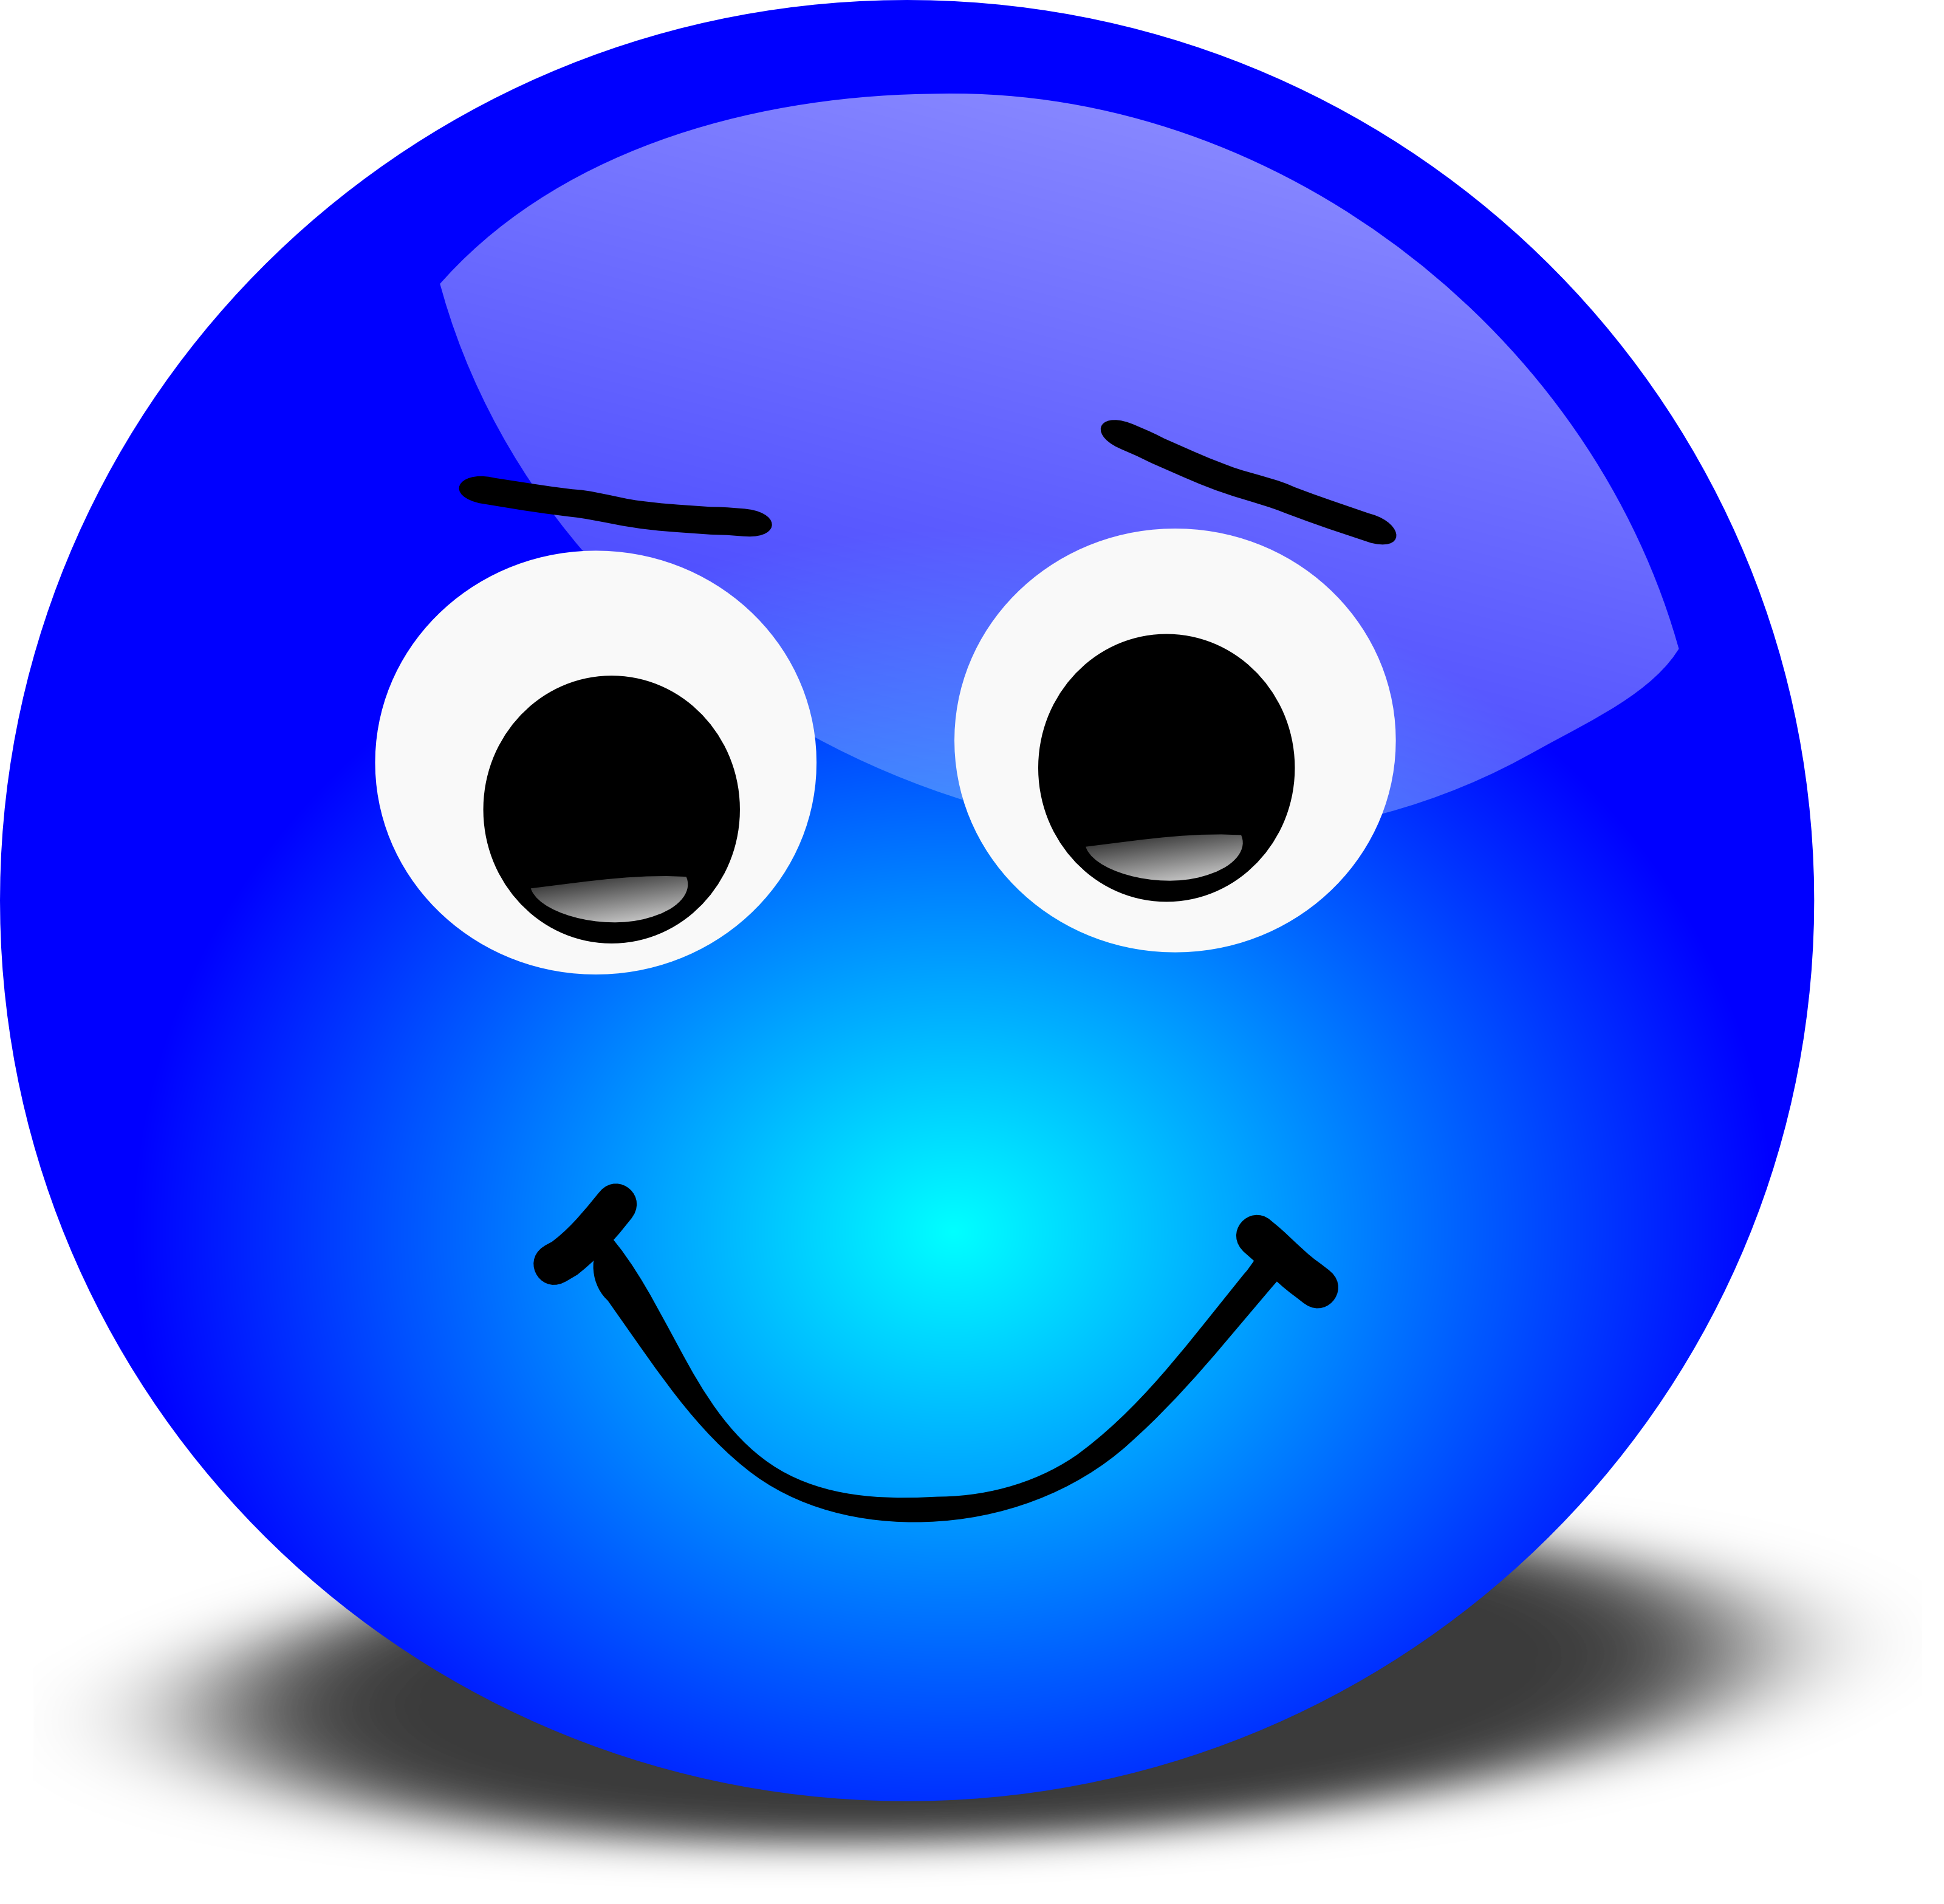 Happy And Sad Face Clip Art - Free Clipart Images